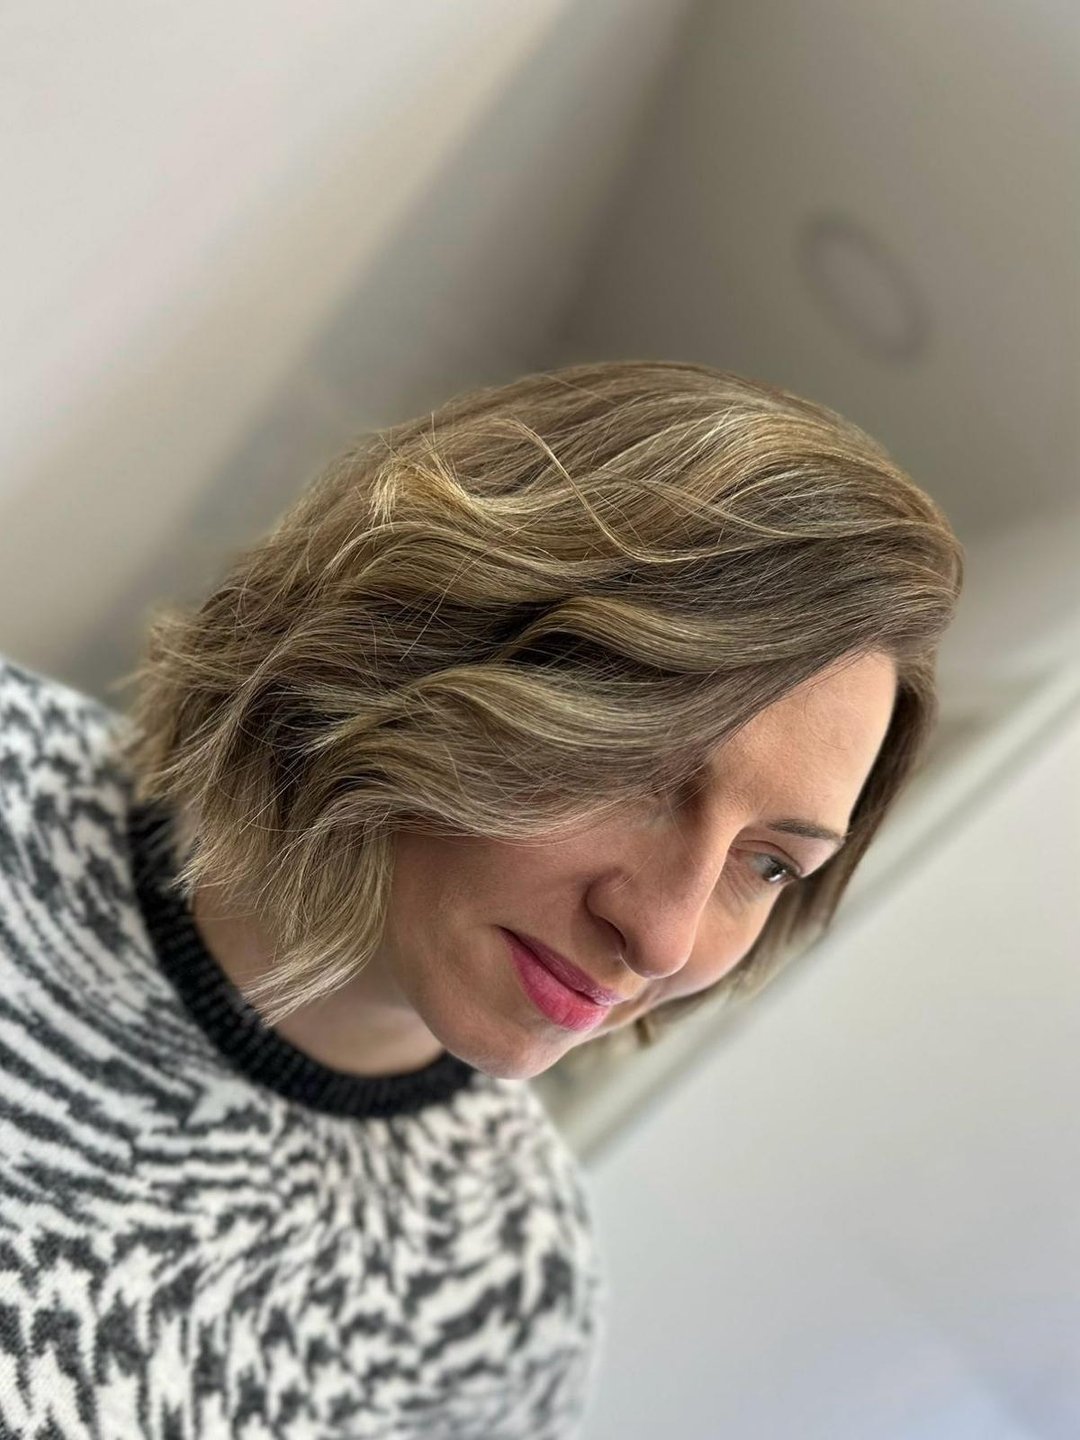 Effortless waves and a touch of sun-kissed charm! 🌟 

Our client's short, wavy hair in a delightful dark blonde hue is the epitome of carefree chic. Ready to embrace that playful elegance? Click the link in our bio and let's bring your sunny vibes t